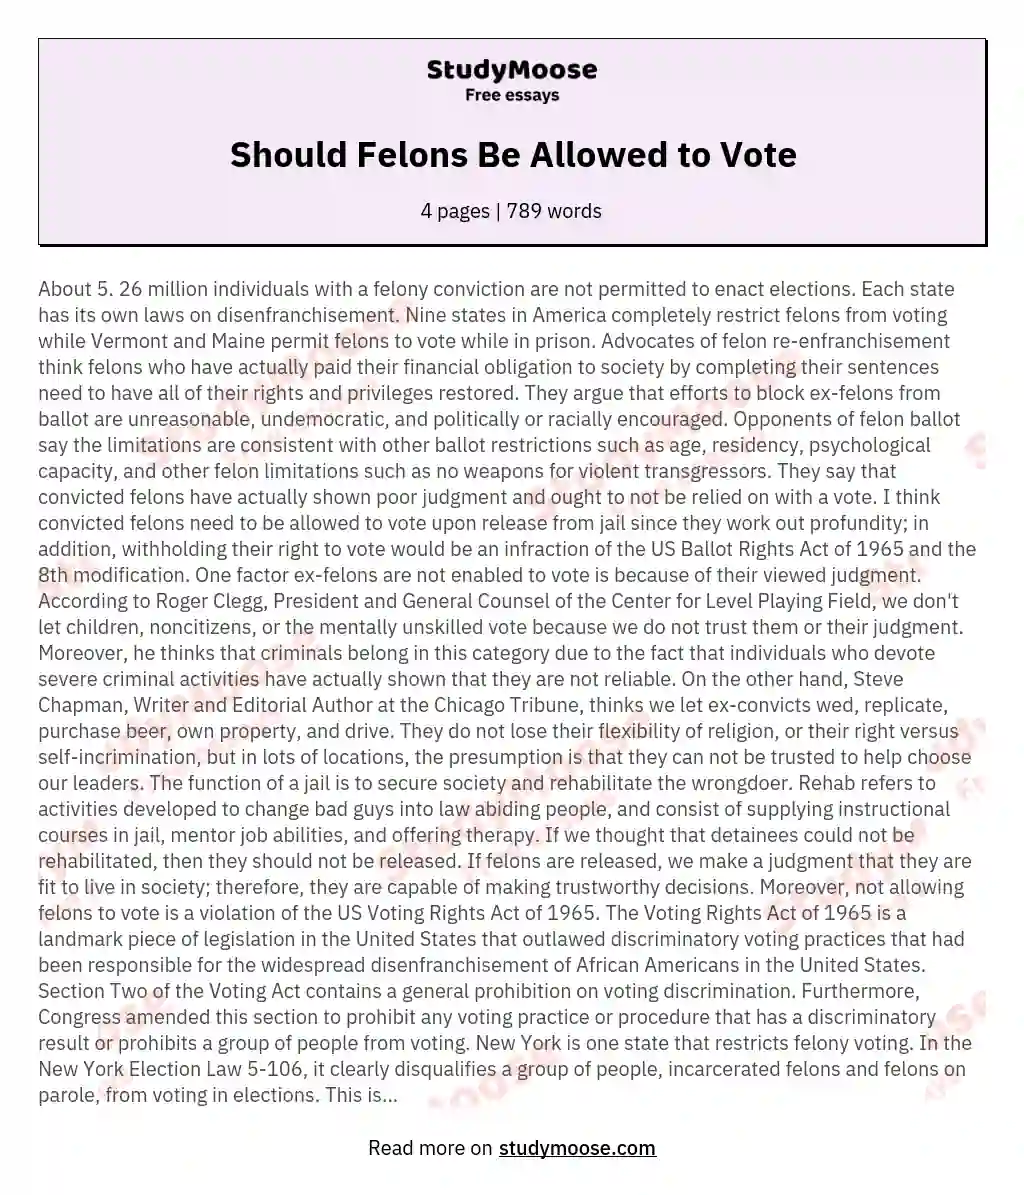 Should Felons Be Allowed to Vote